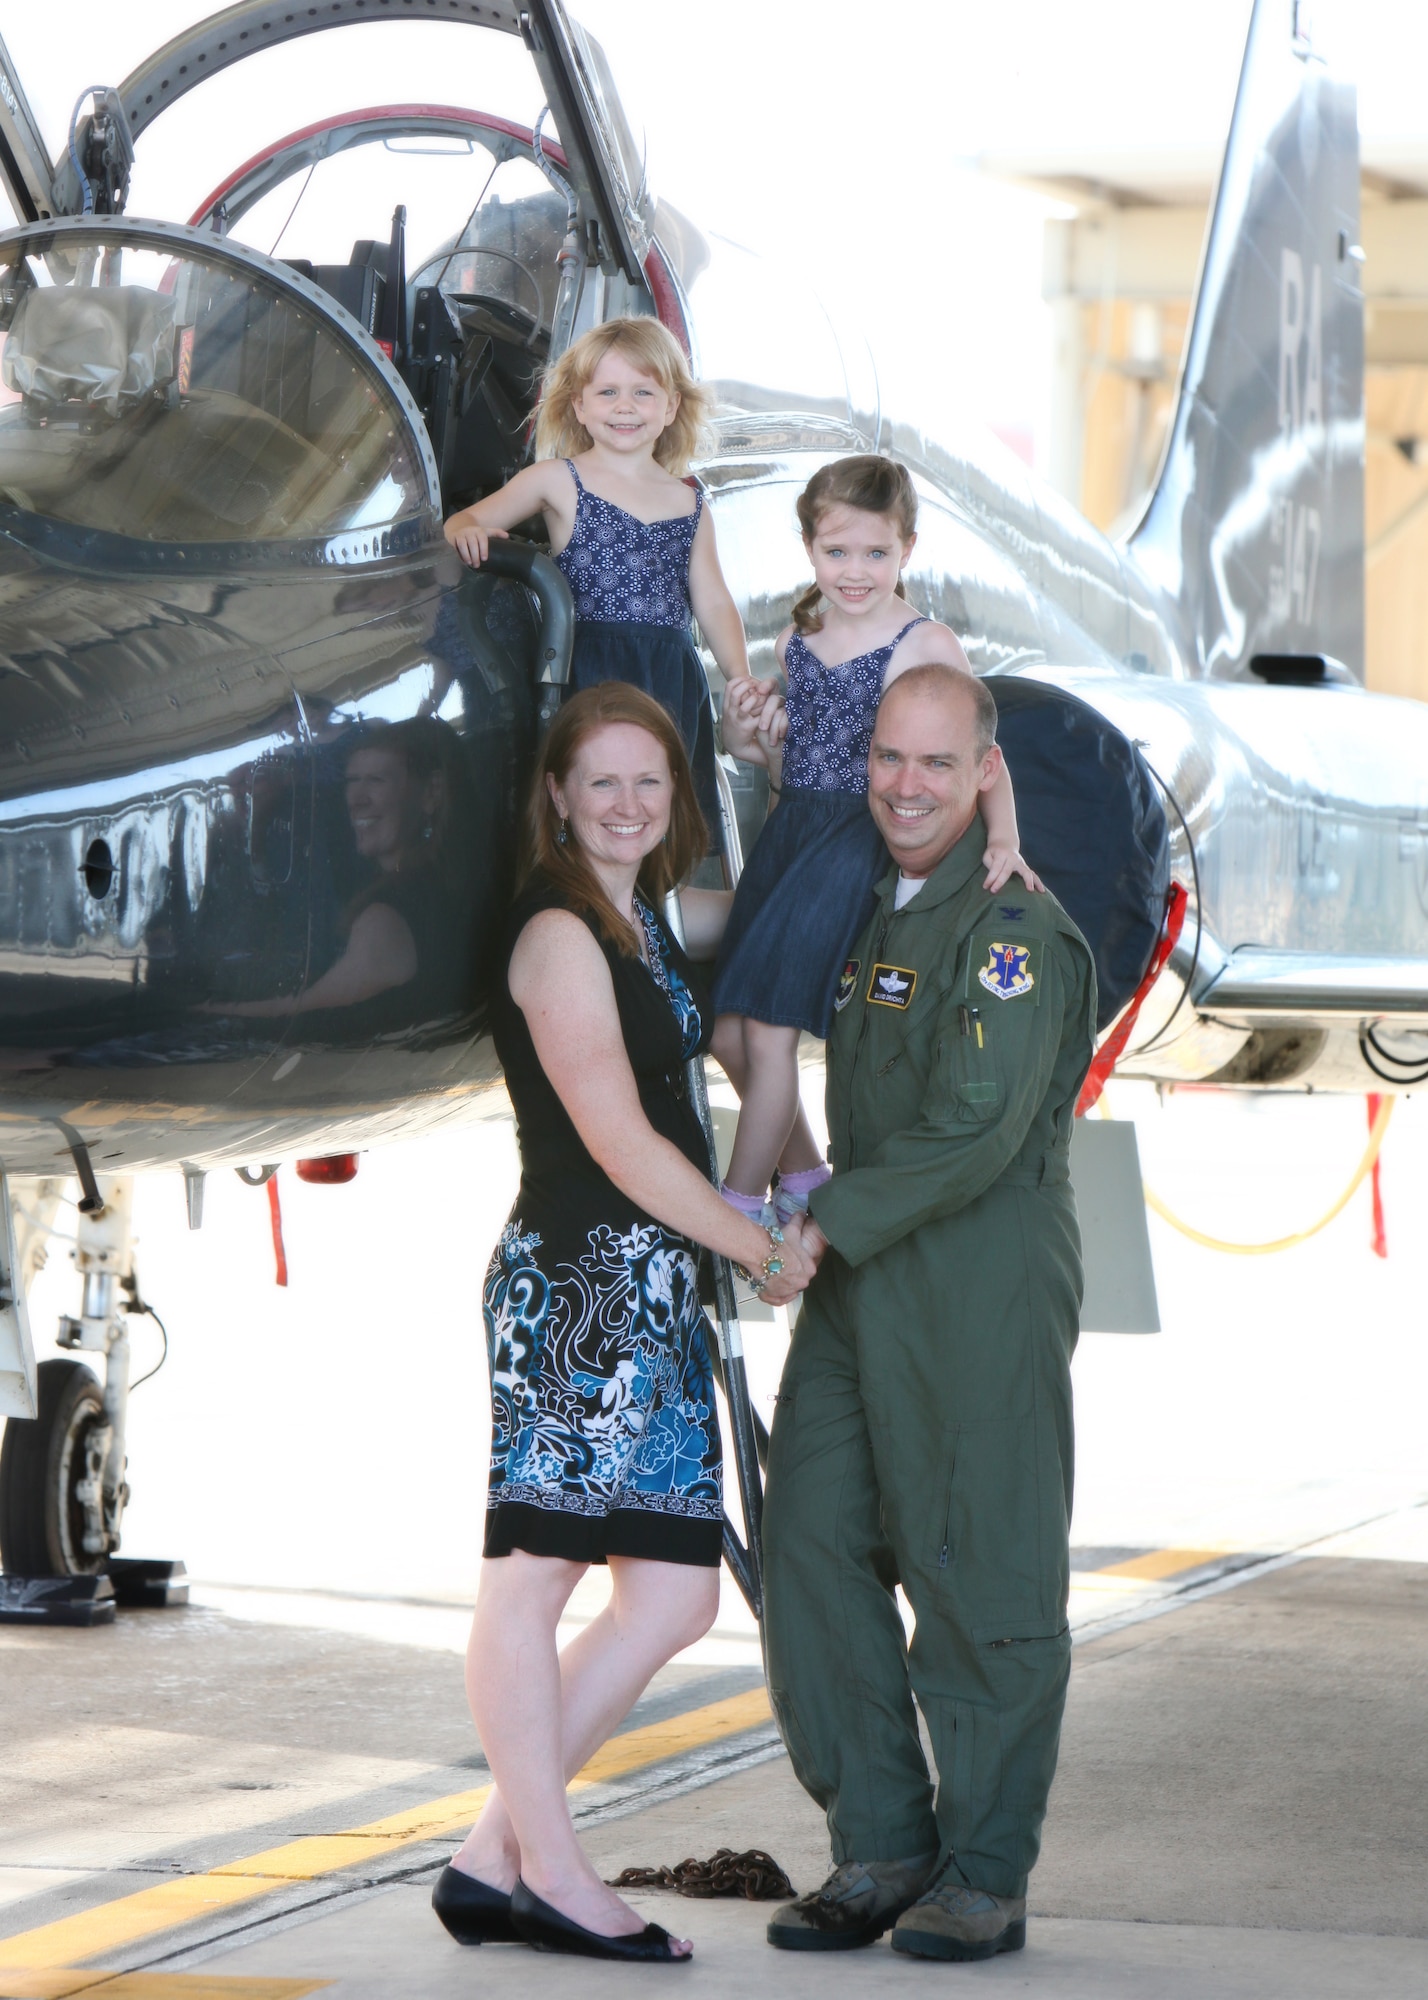 Col. David Drichta, 12th Operations Group deputy commander, his wife Shannon, and daughters, Allison and Natalie, pose for a photo with Drichta’s T-38C Talon, following his first flight back after his battle with cancer at Joint Base San Antonio-Randolph, Texas June 19, 2013.  Drichta was diagnosed with Stage IV cancer in February 2012 and, after more than a year in recovery, was medically cleared to return to flight status.  The flight marked his return to flight status as well as his 3,000th flight hour in Air Force aircraft. (Courtesy photo by Stacy Nyikos)